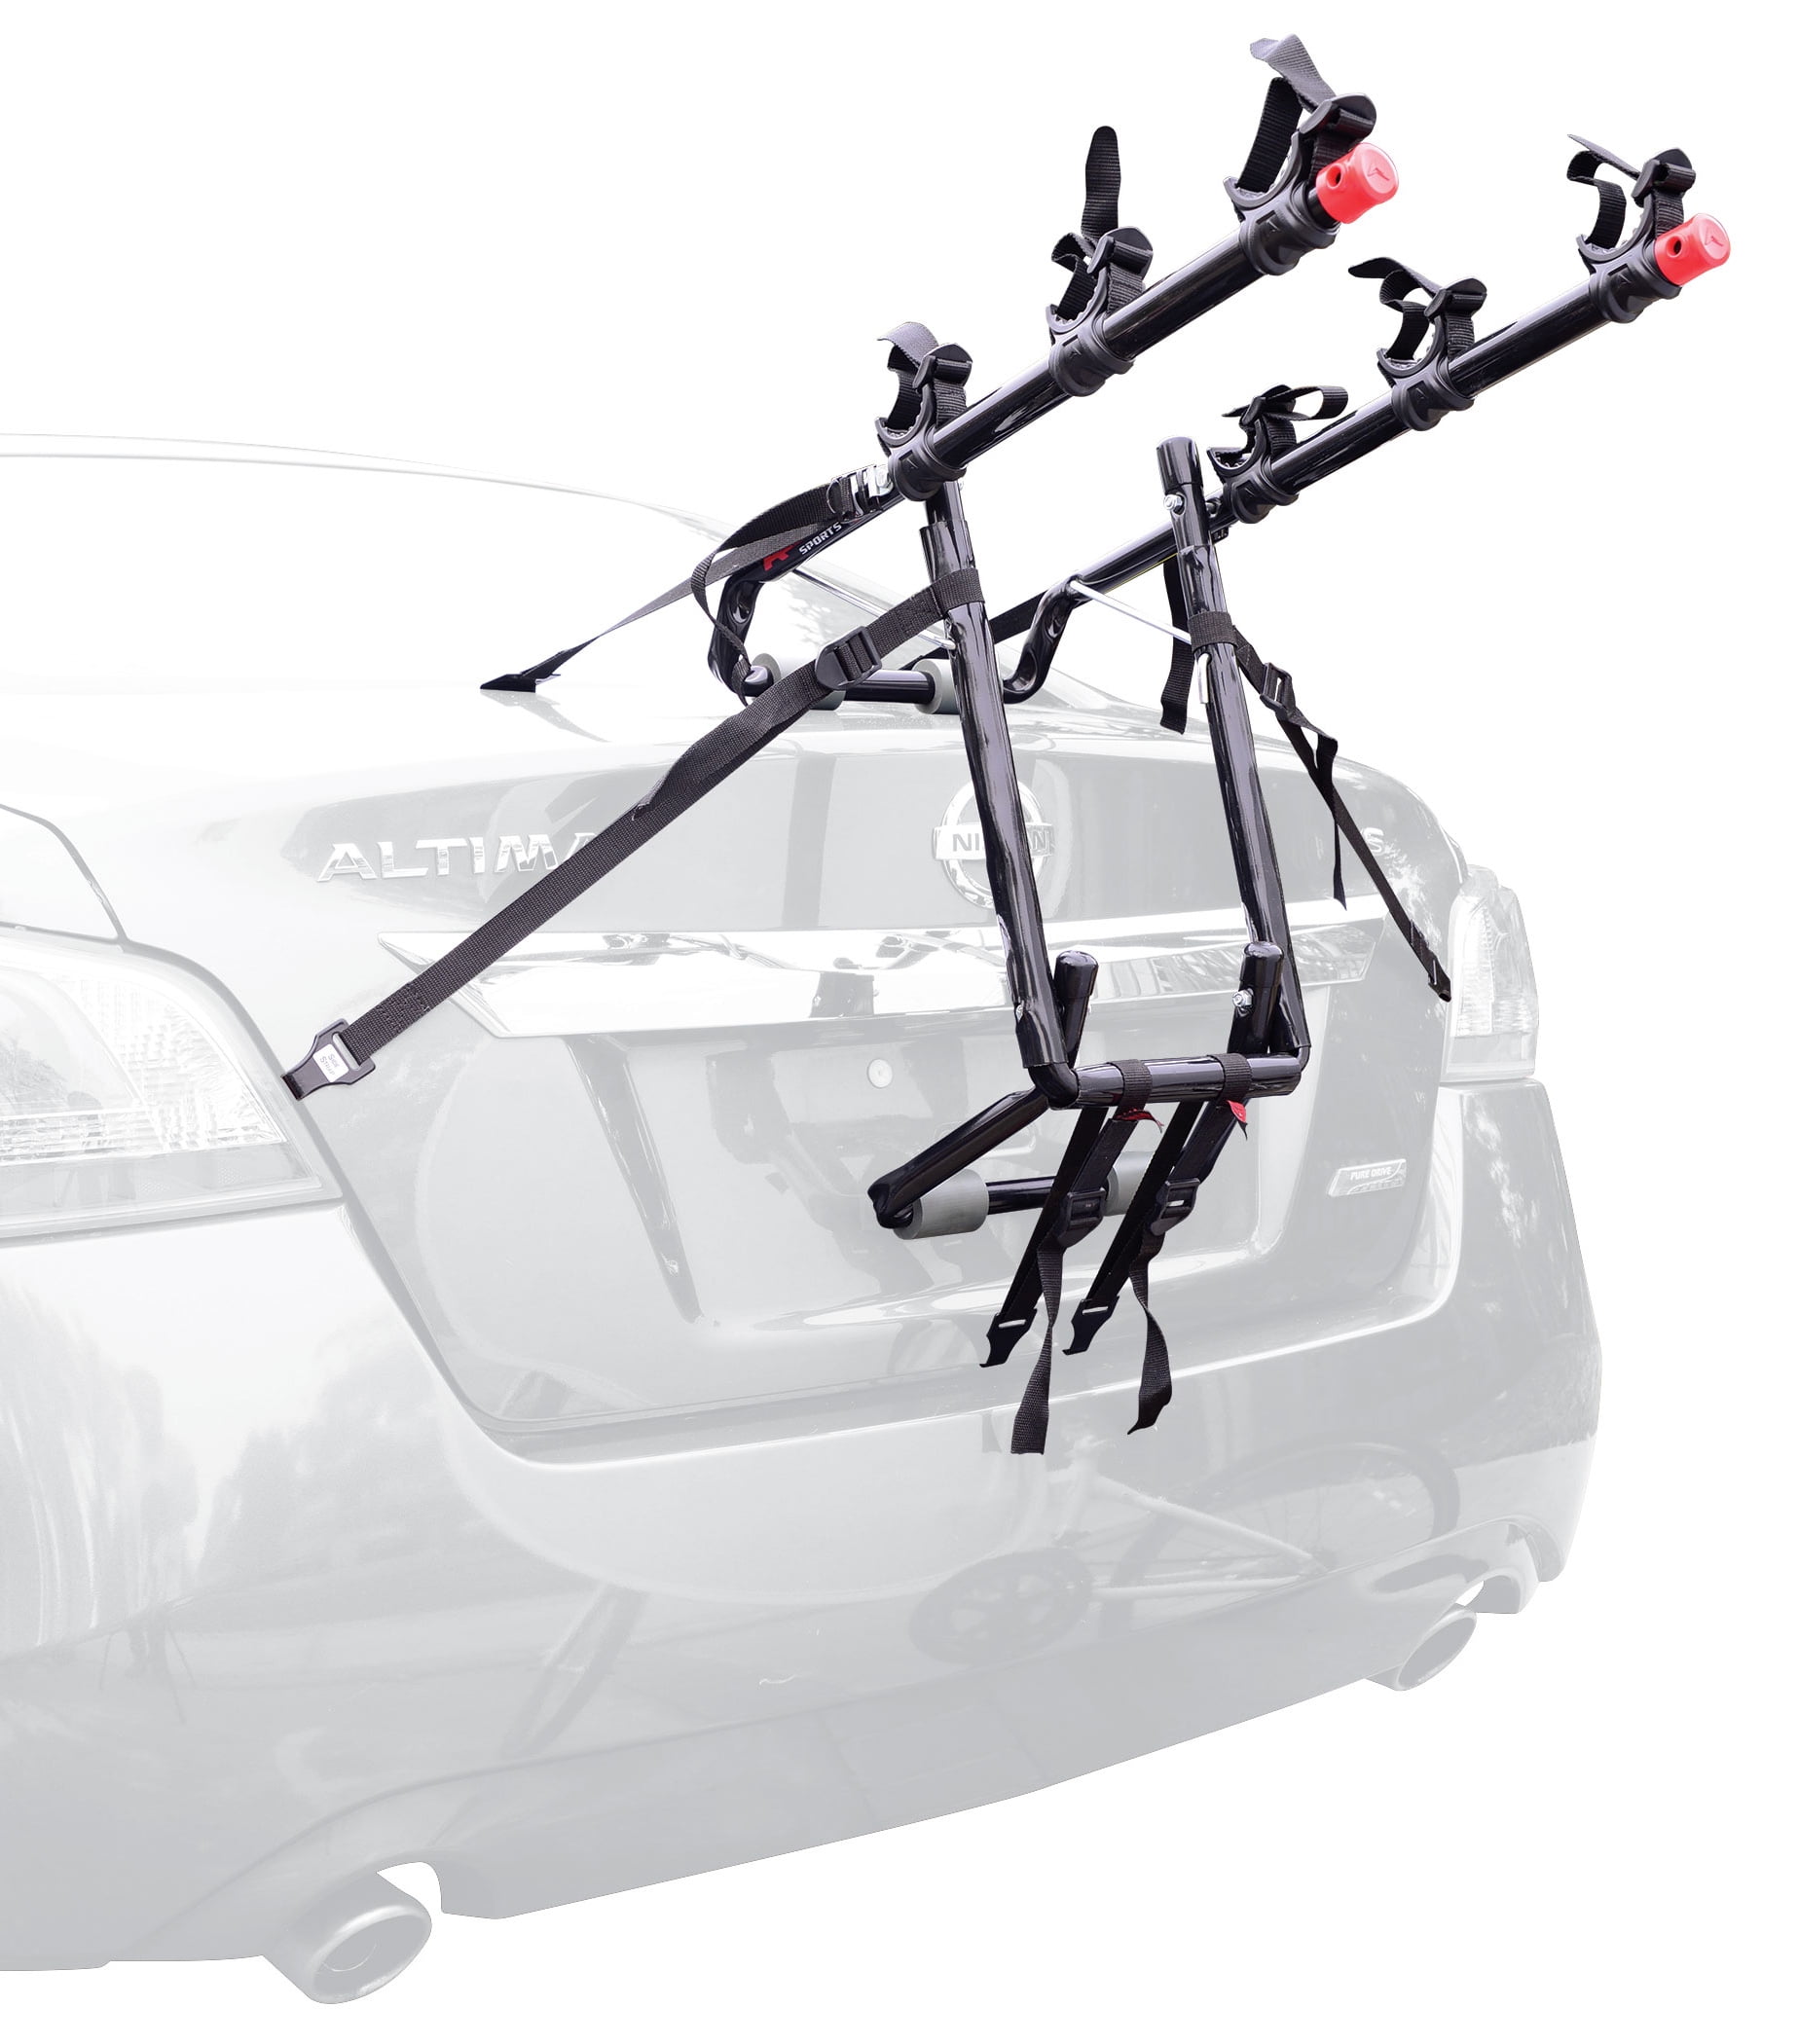 Allen XR200 Hitch Mounted Easy Load 2-Bike Carrier for 1 1/4 inch or 2 inch Hitch for sale online 